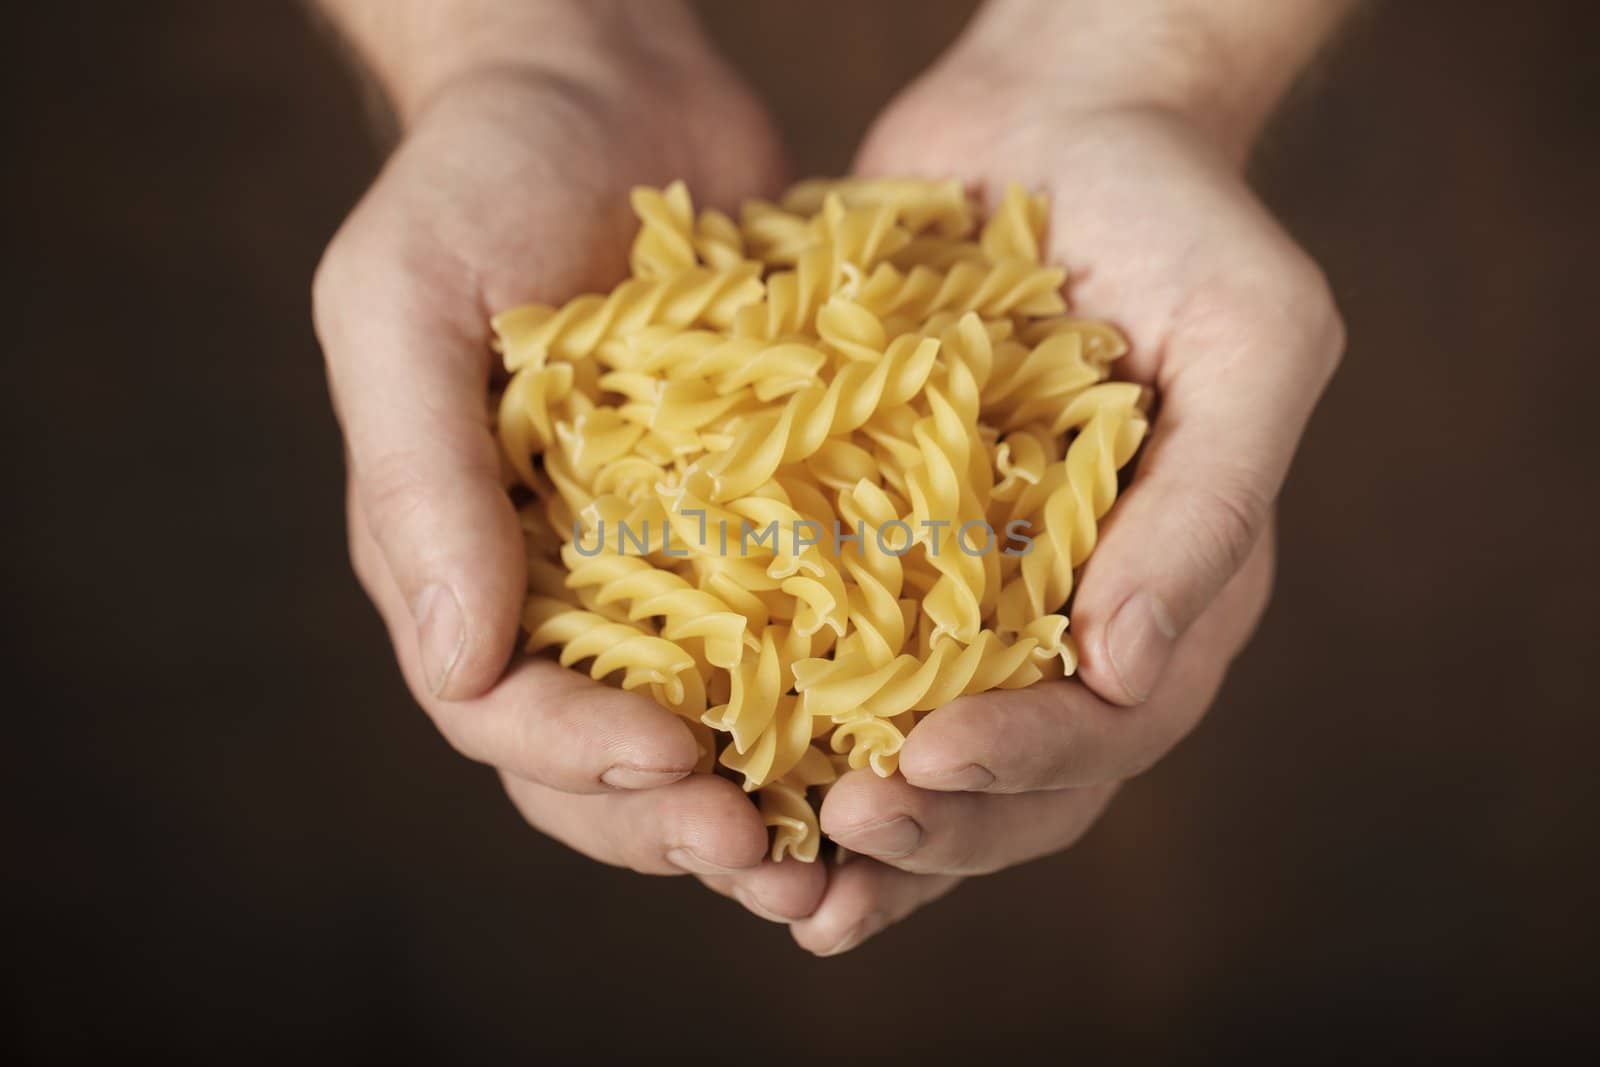 Man holding uncooked fusilli pasta in his hands. Very short depth-of-field.